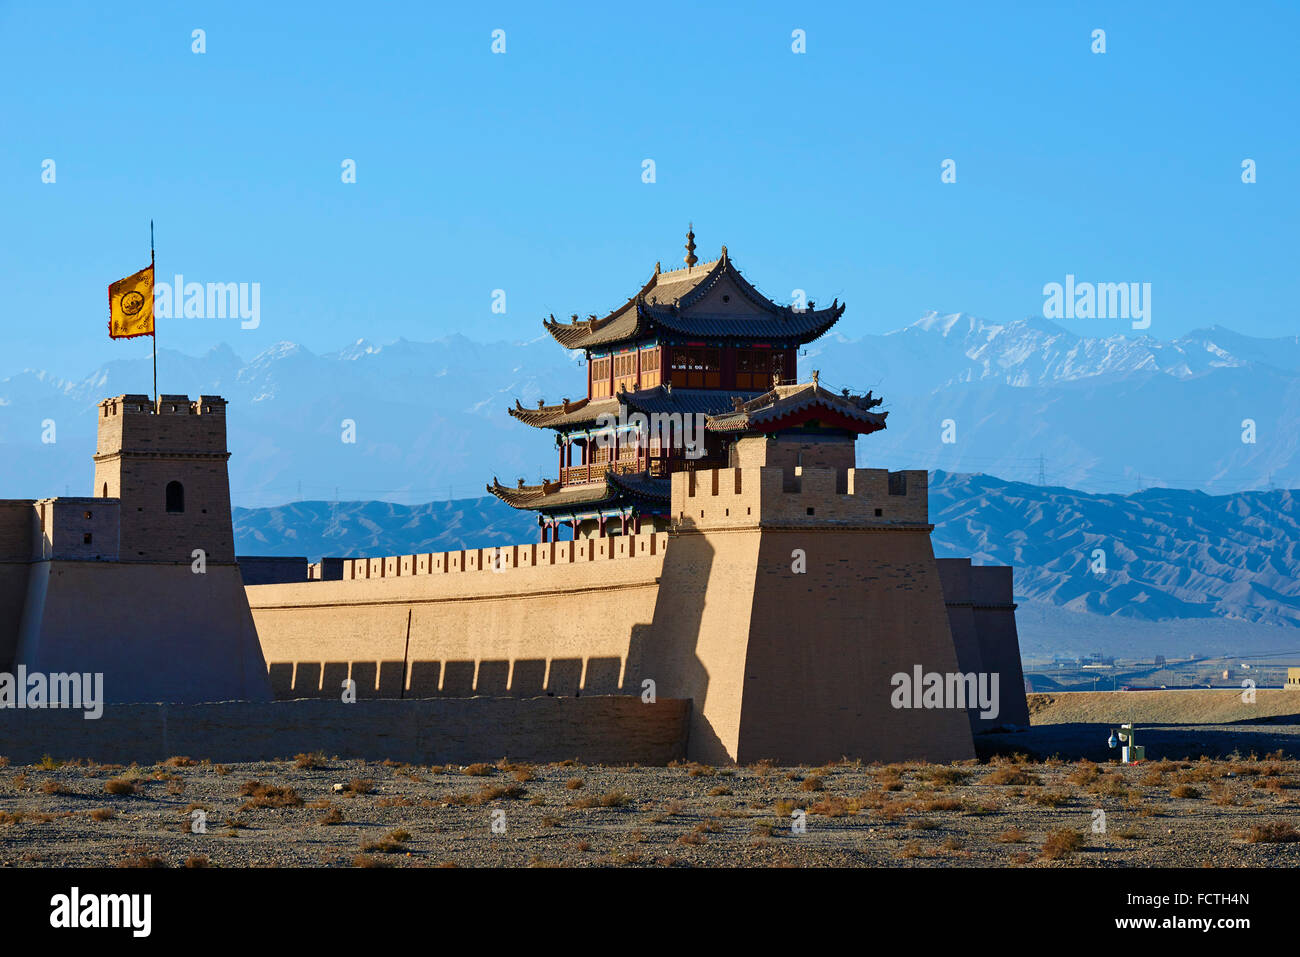 China, Gansu province, Jiayuguan, the fortress at the western end of the Great Wall, Unesco world heritage Stock Photo